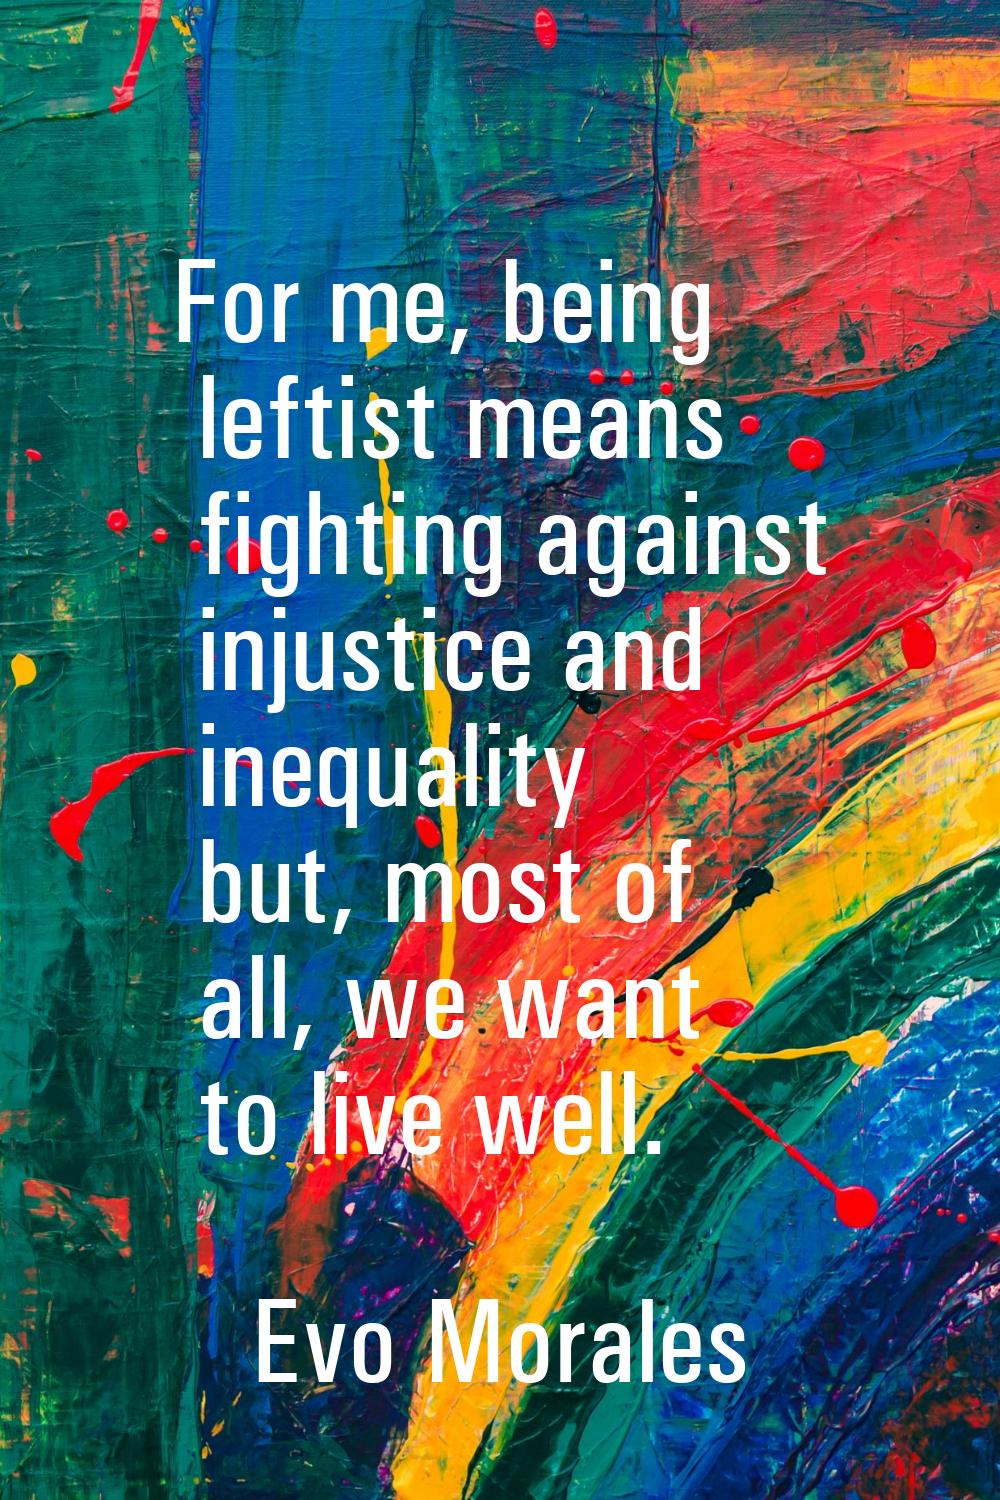 For me, being leftist means fighting against injustice and inequality but, most of all, we want to 